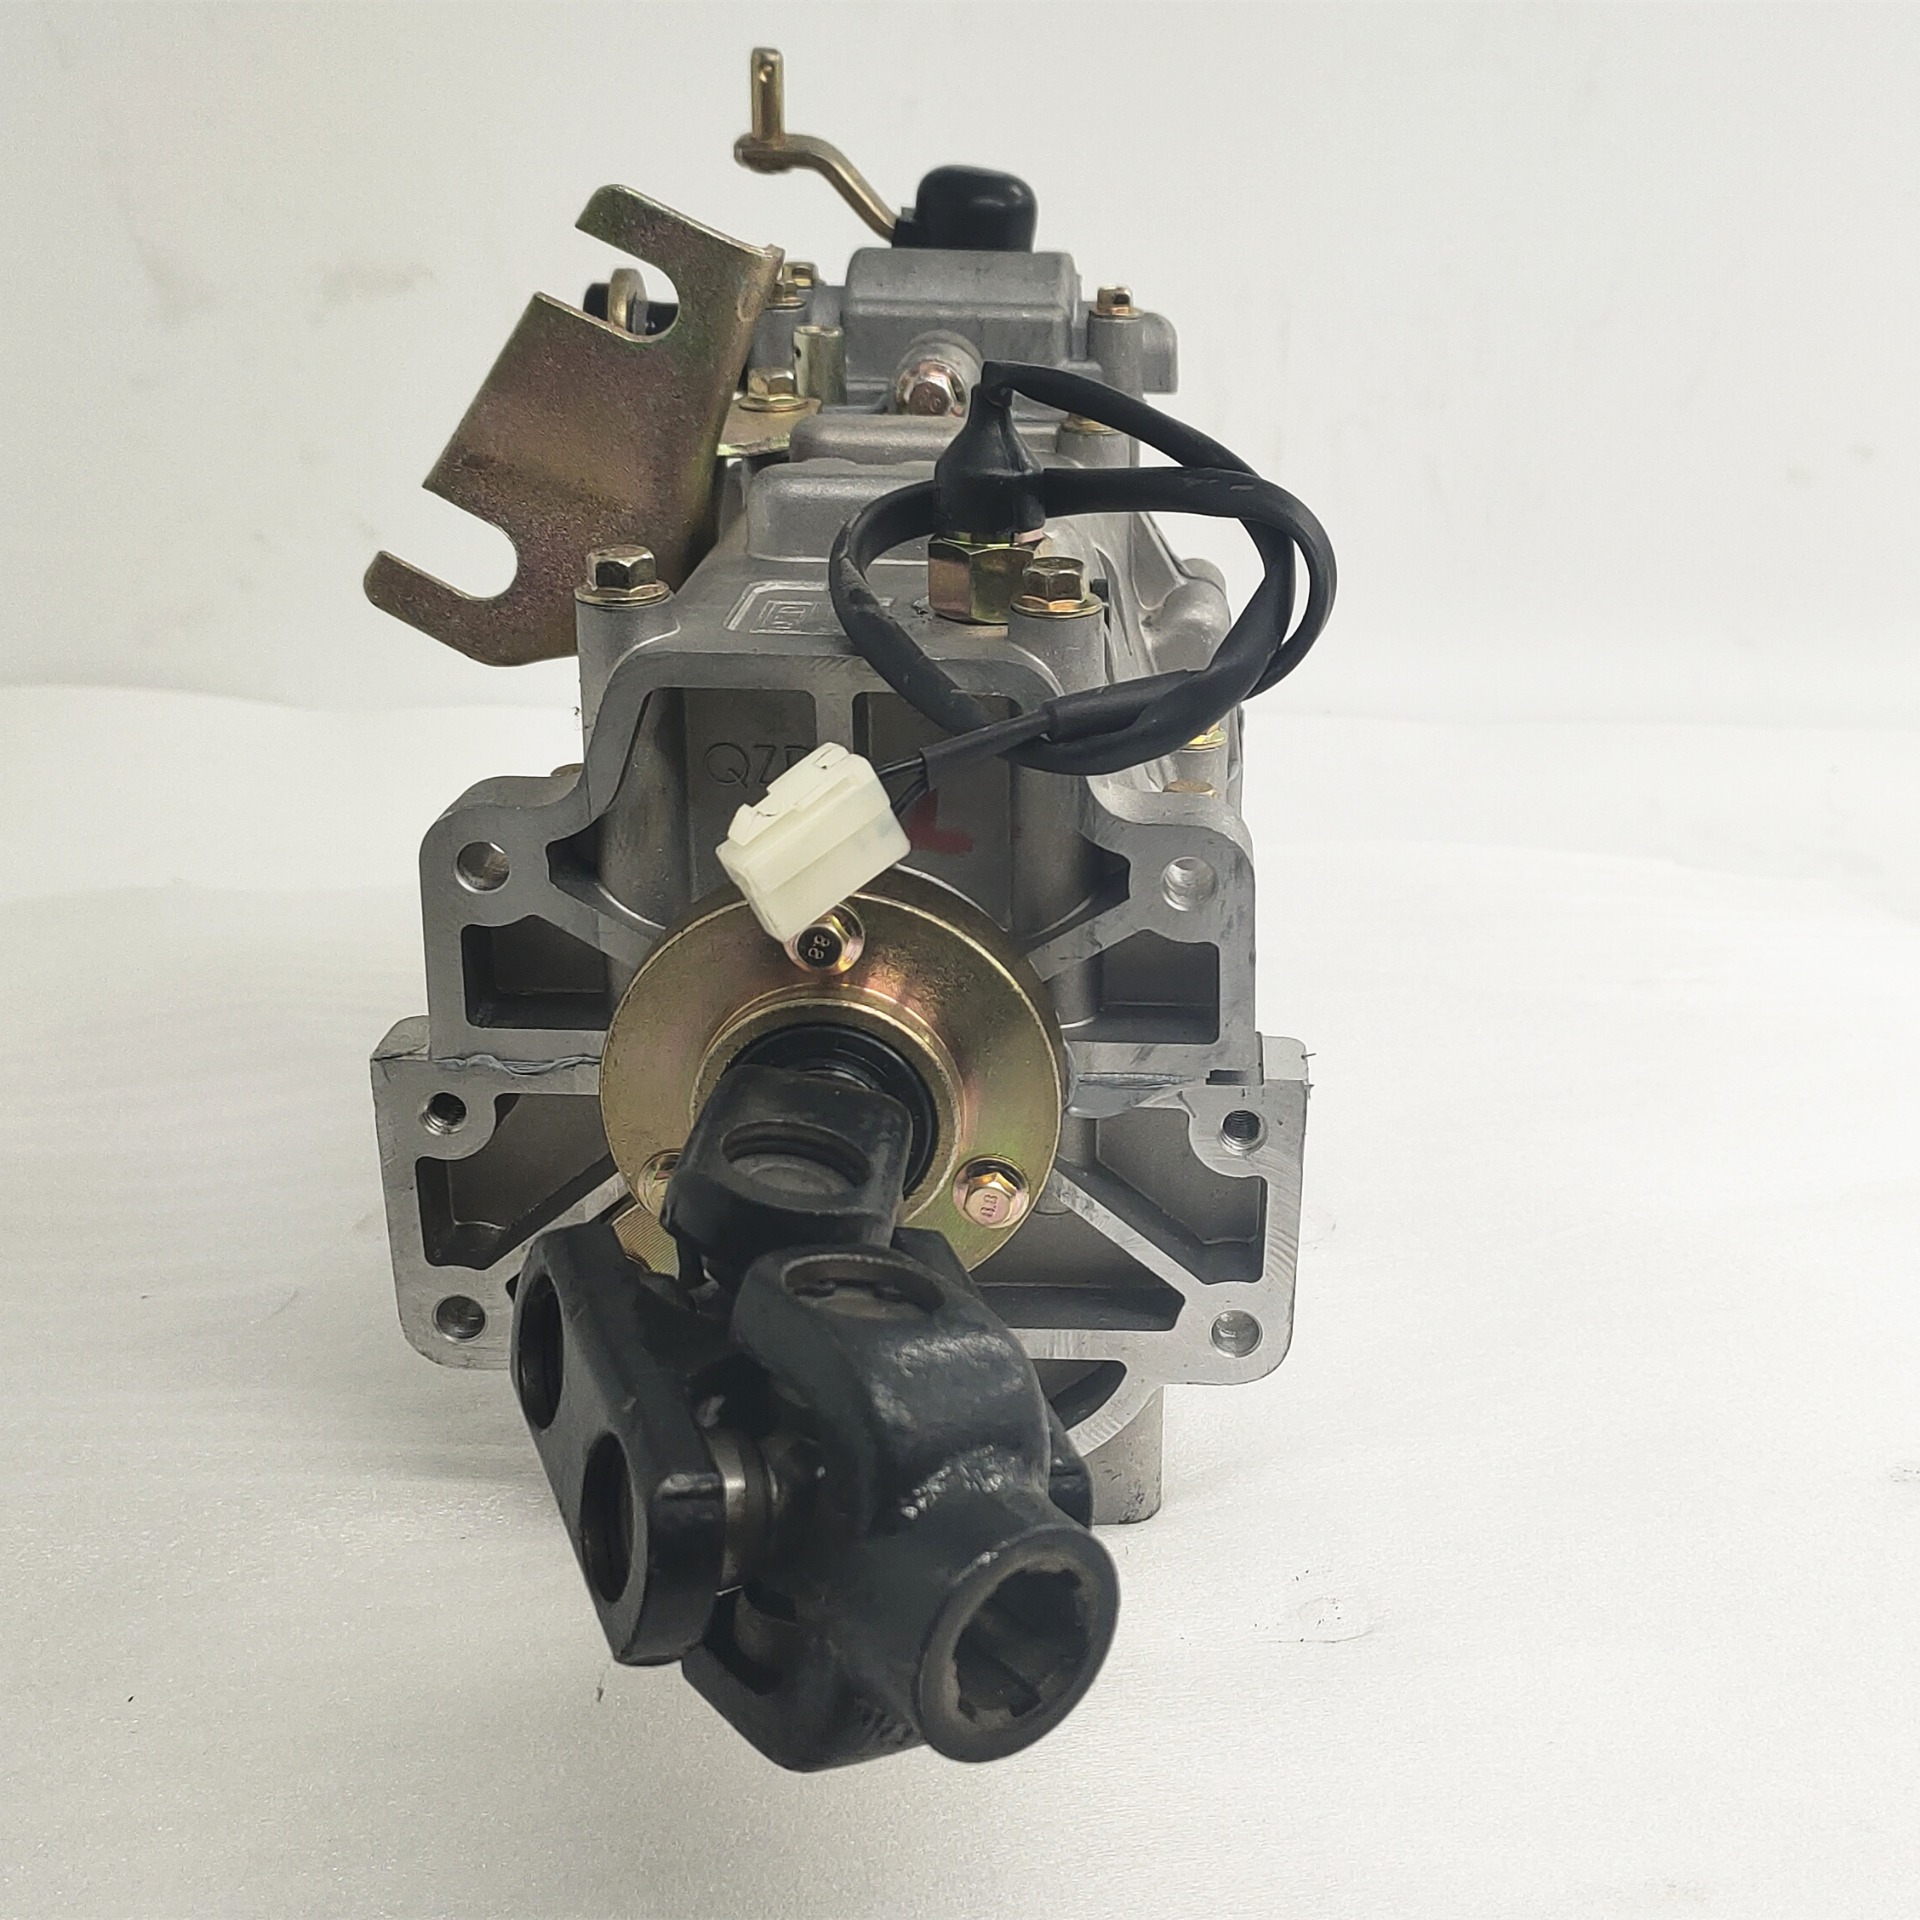 DAYANG High Quality 4-speed transmission Aluminum alloy housing ratio 2.174 1.476 2.348 made in China origin CCC